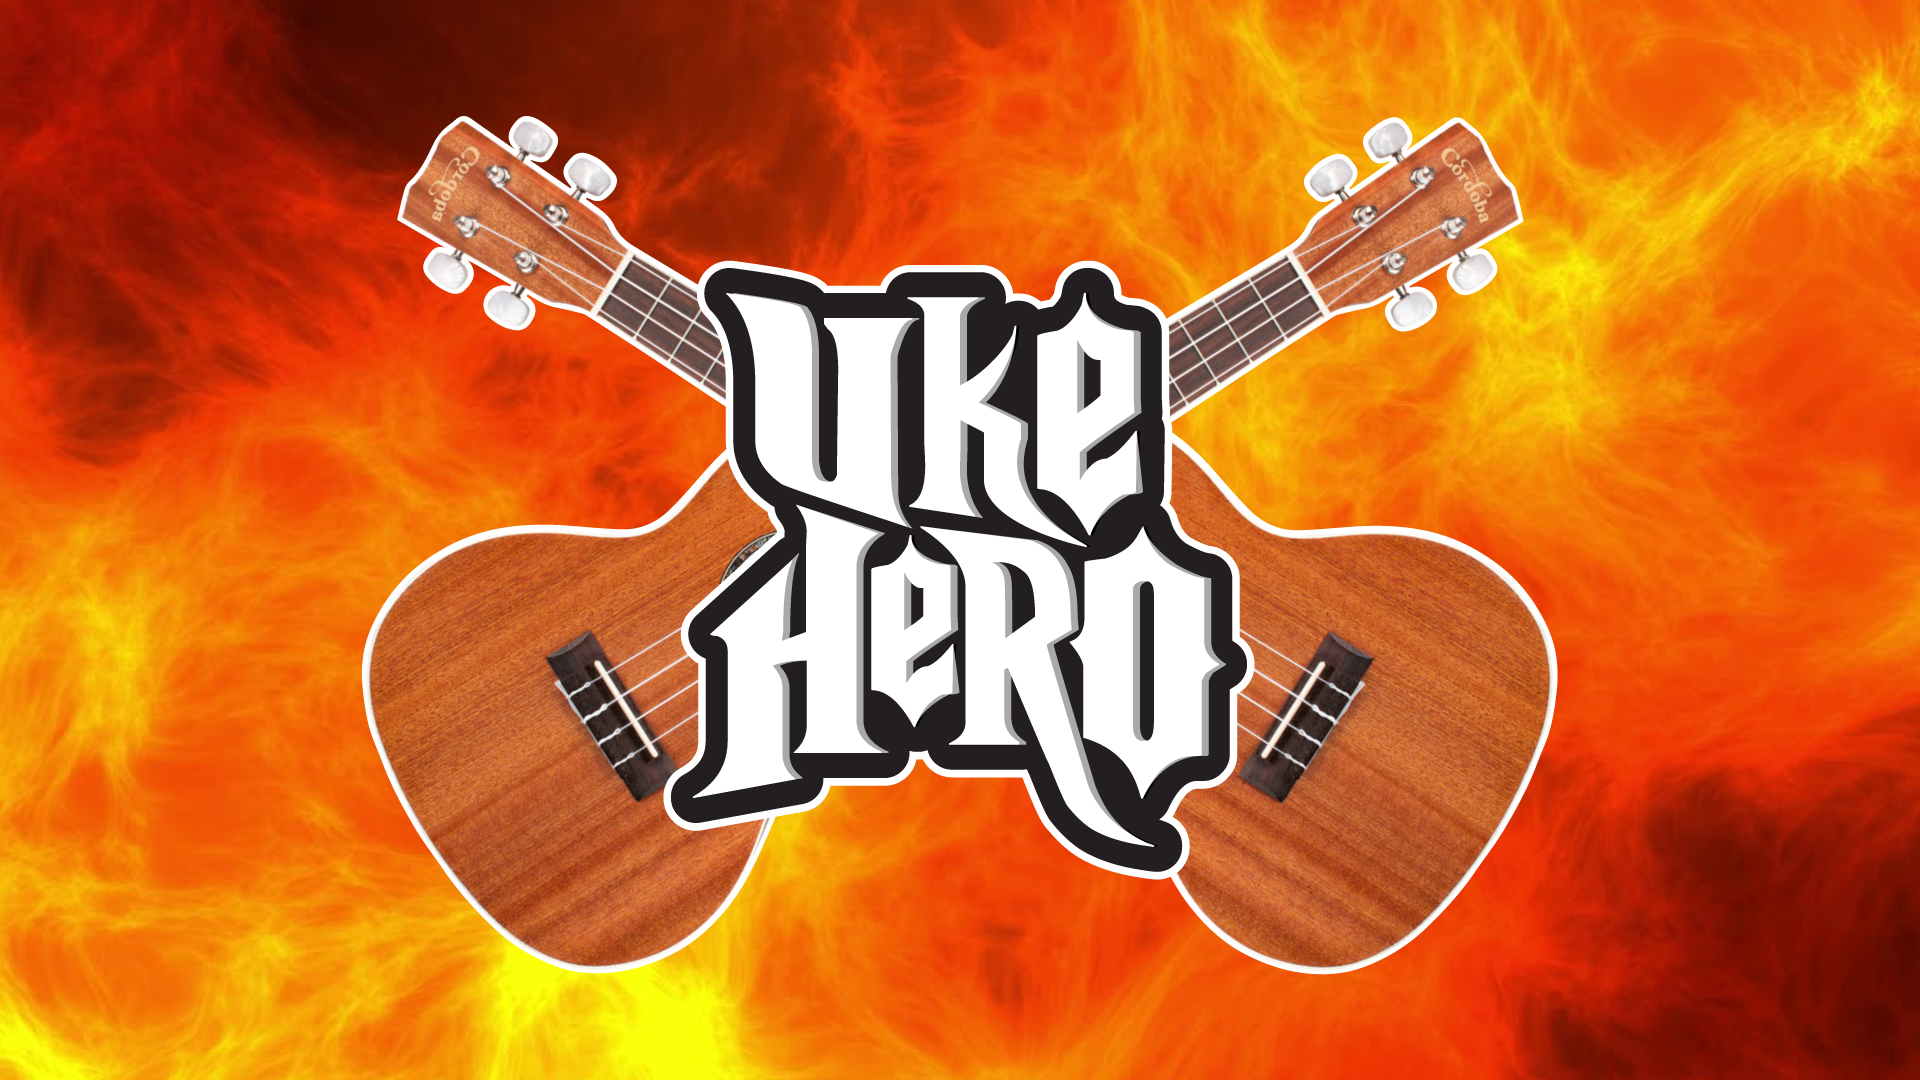 Featured image for “For Those About to Uke”